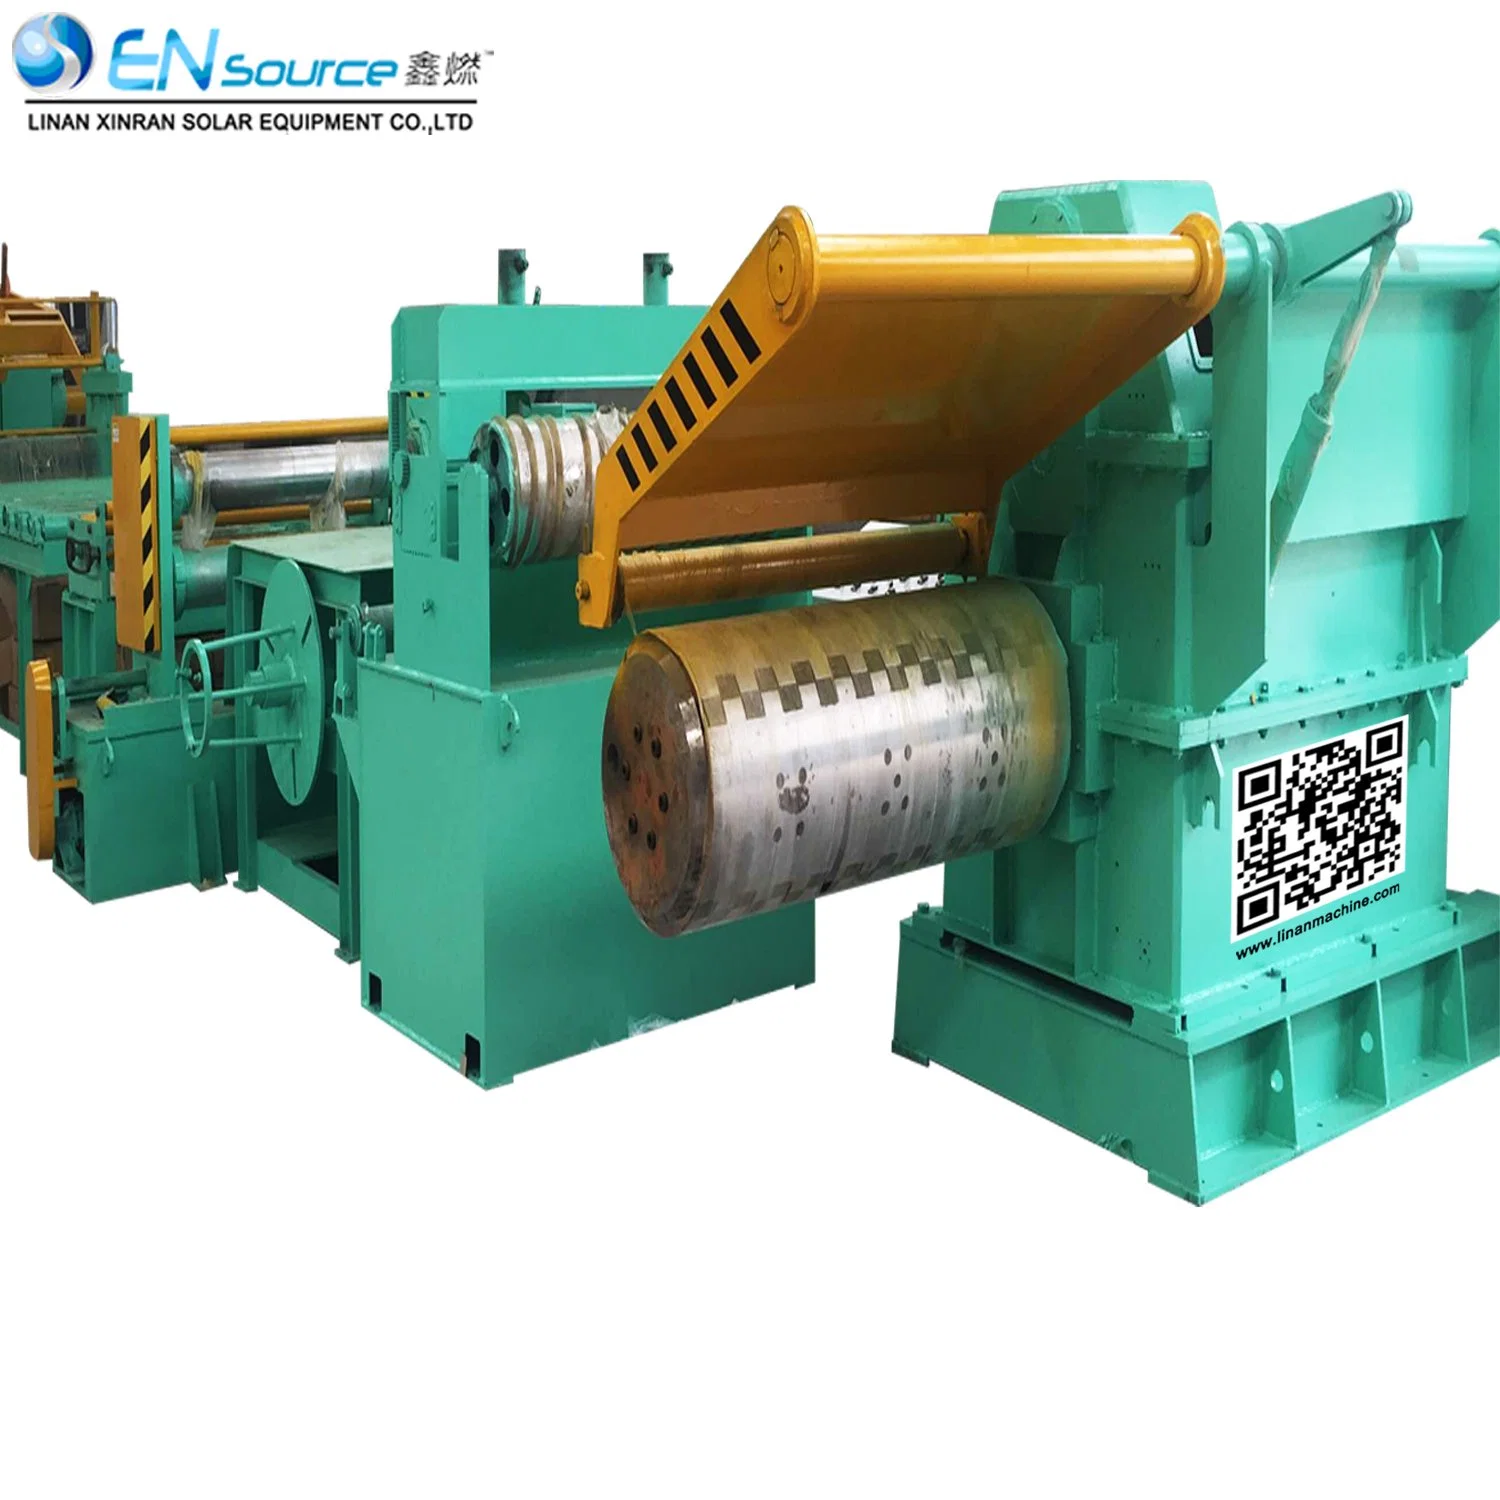 0.3-3.0&Times Tension Leveler Automatic Straightening Slitting Machinery